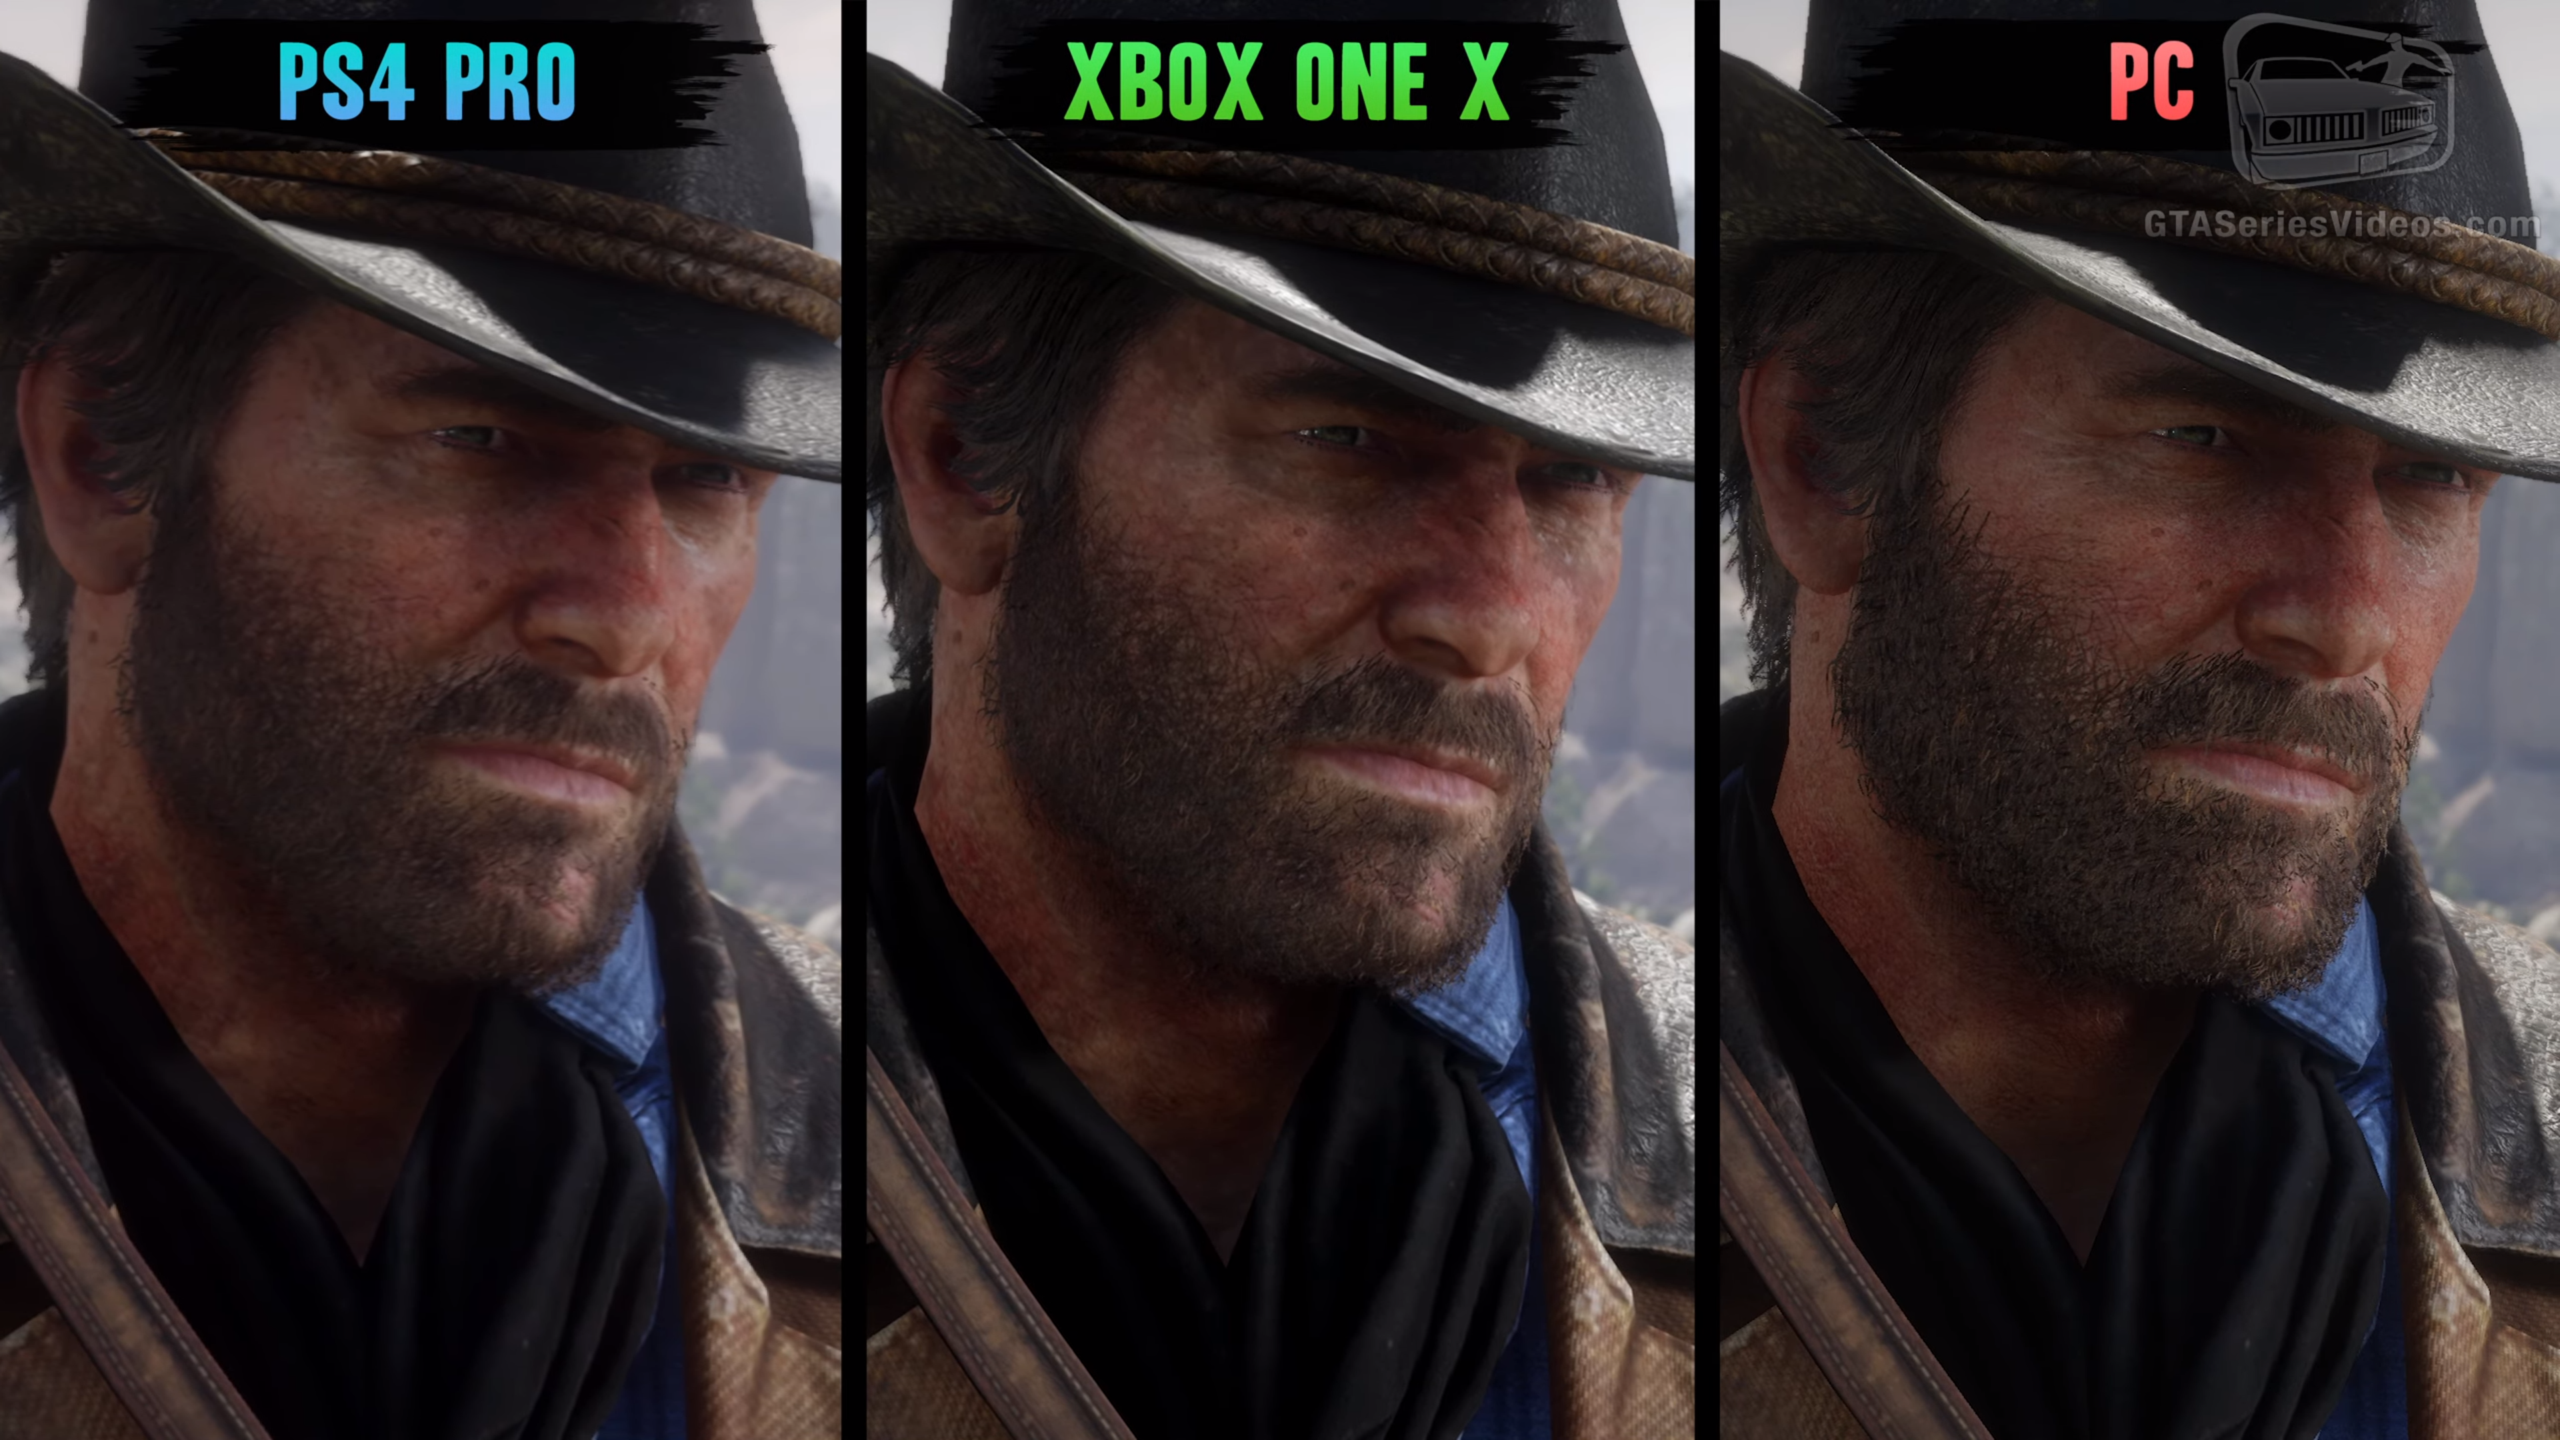 Red dead redemption на ps5. Xbox one x Red Dead Redemption 2. Red Dead Redemption 2 Xbox one vs ps4. Rdr 2 ps4. Rdr 2 ПК vs Xbox one.